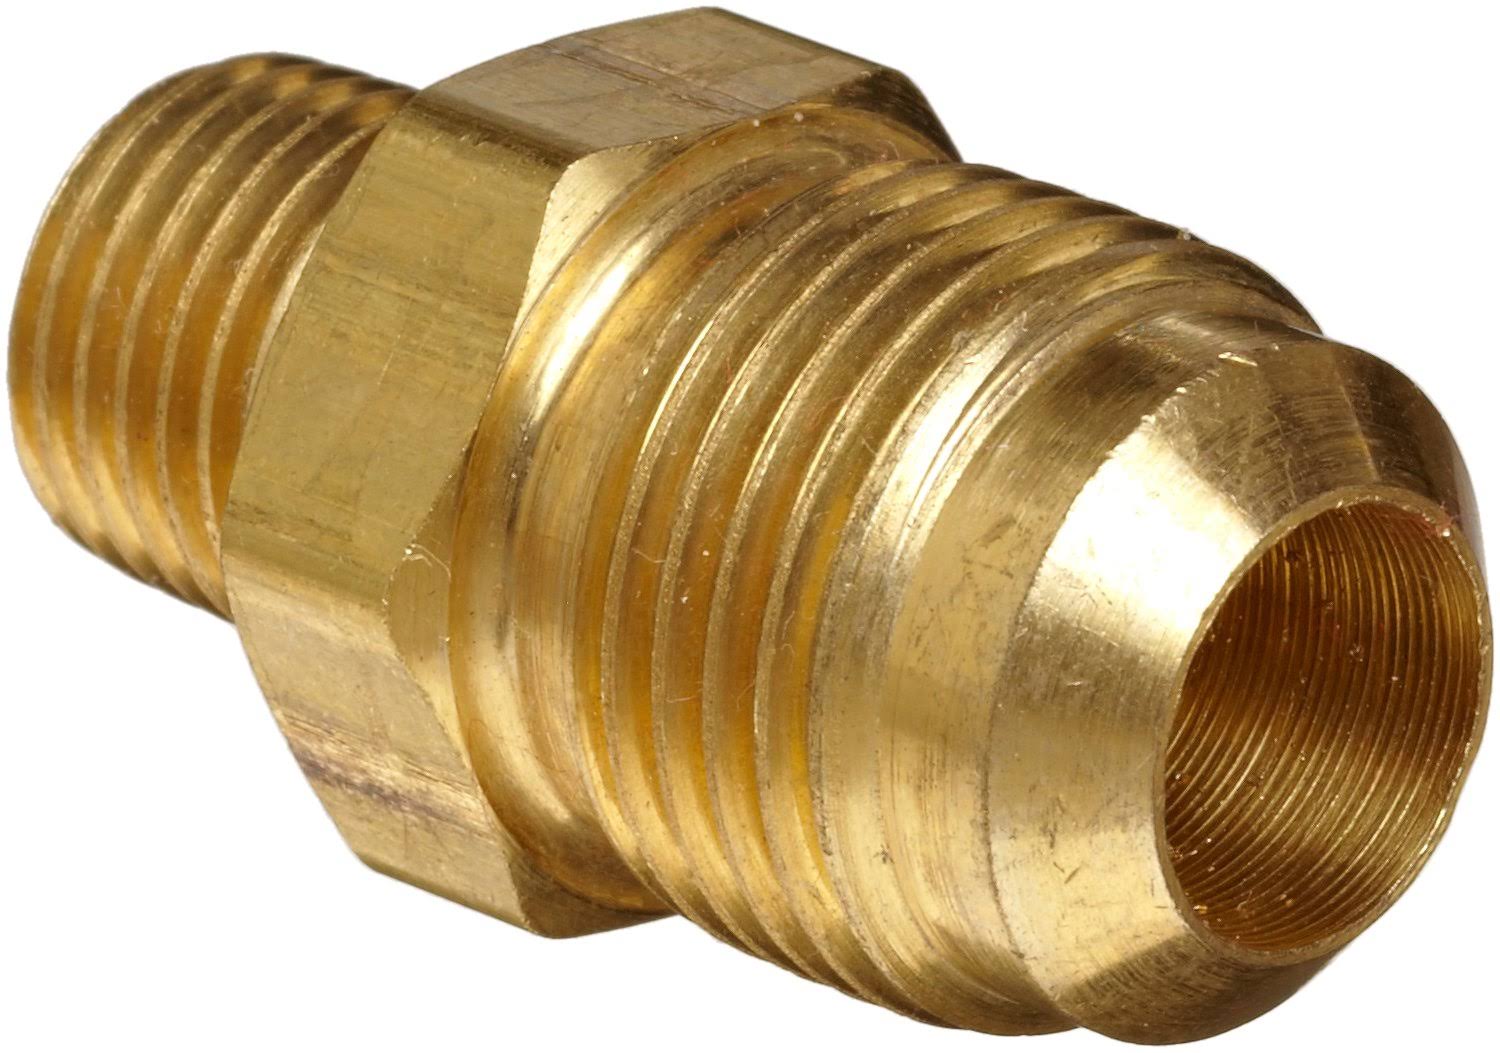 Anderson Metals Brass Tube Fitting - Half-Union, 1/2" Flare x 3/4" Male Pipe